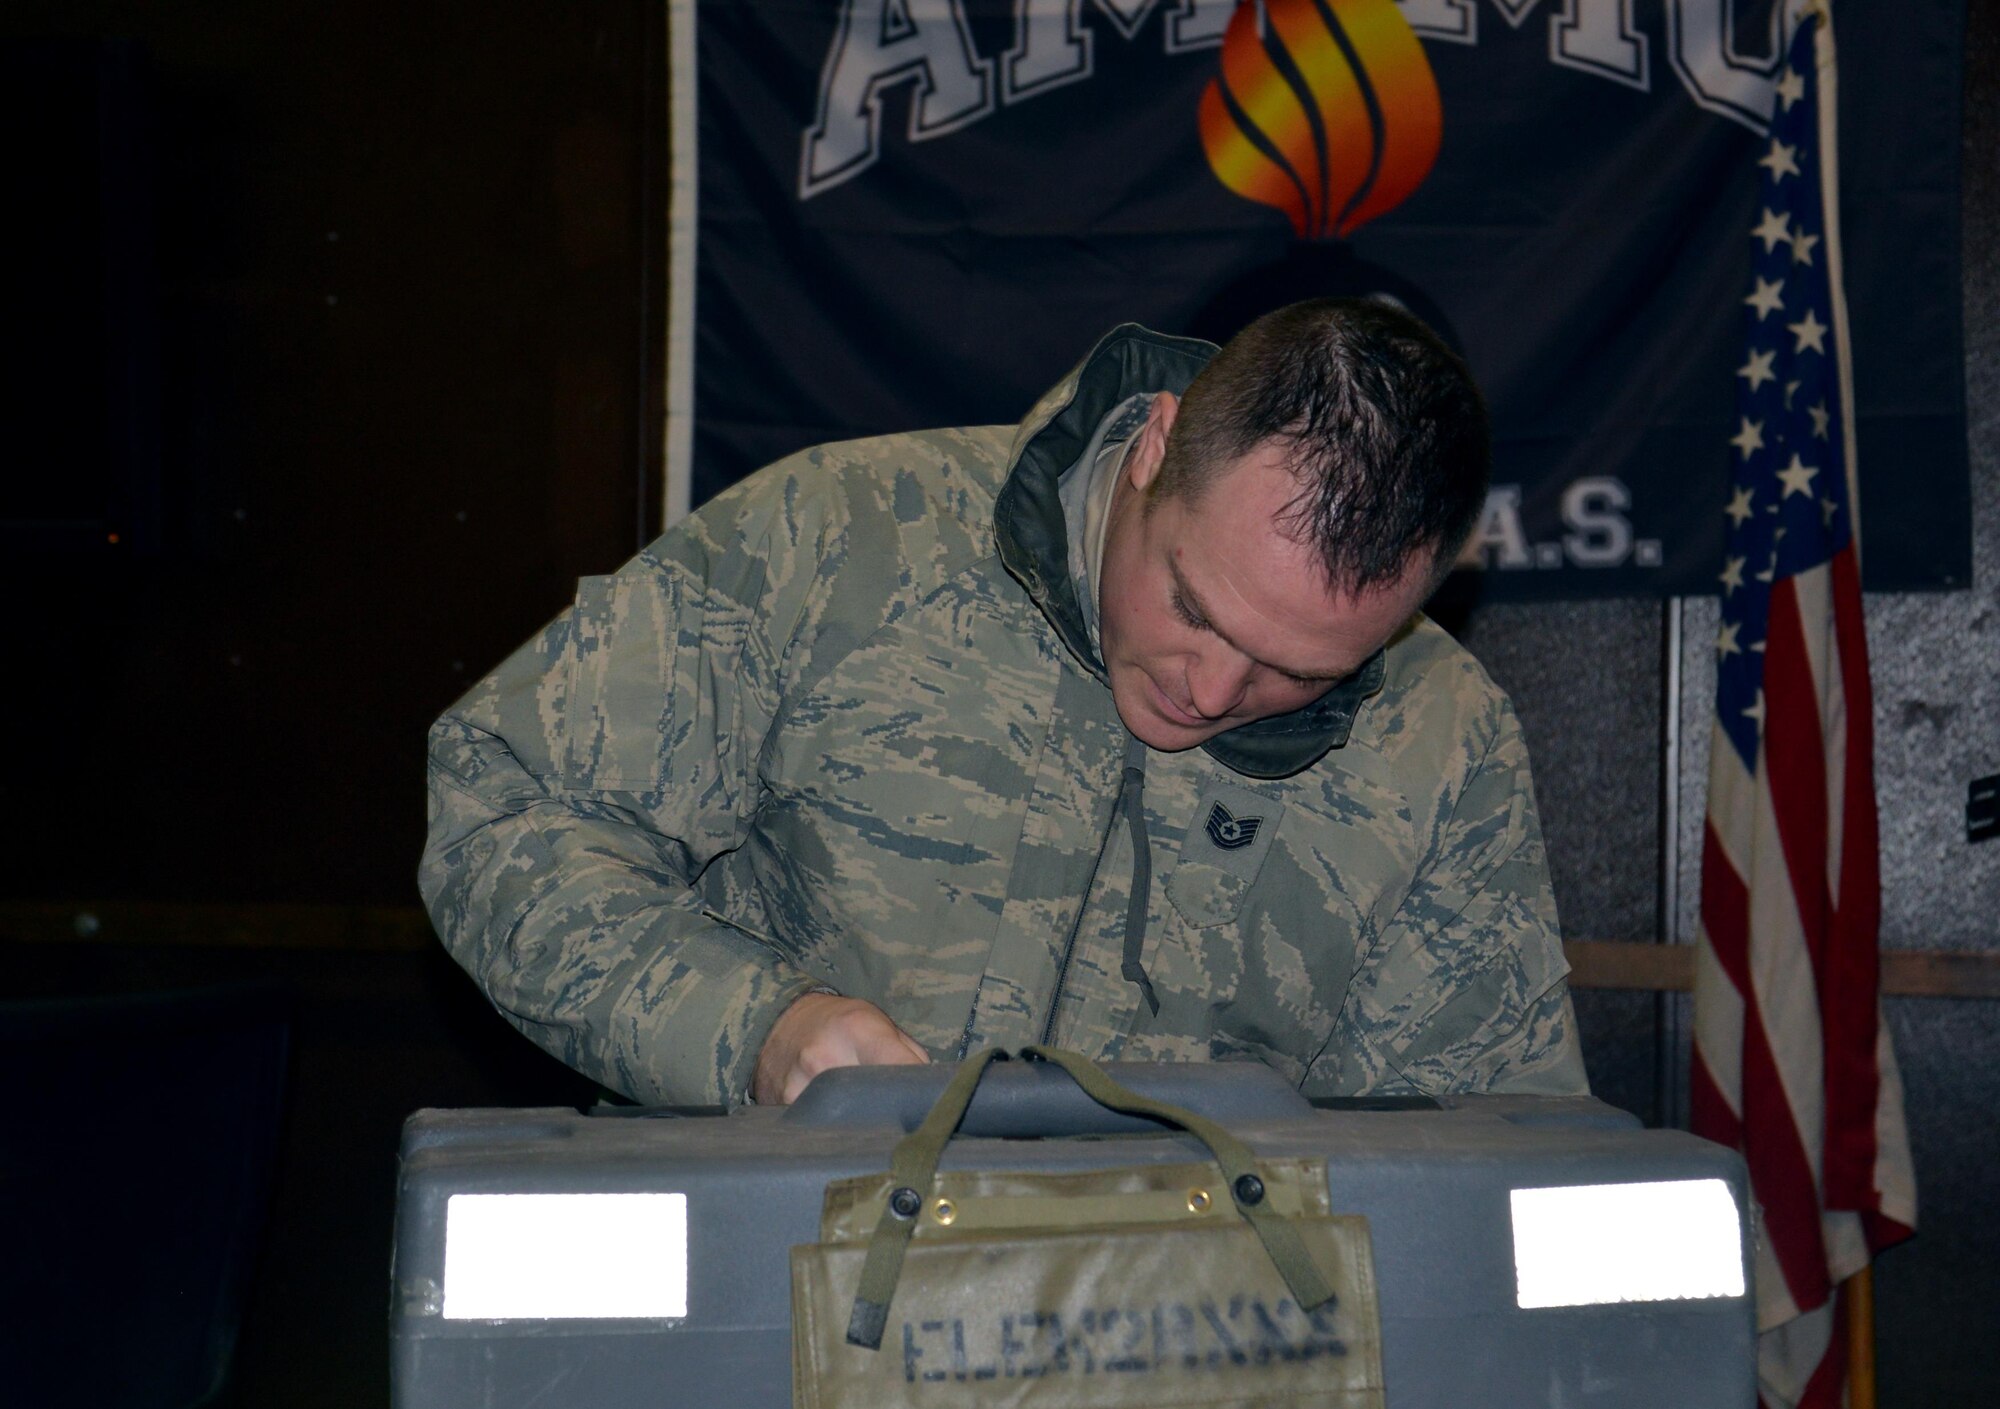 Members of the 477th Fighter Group showcase equipment and capabilities from the 3rd Munitions Flight November 6, 2016. Munitions Systems specialists are Airmen tasked with handling, storing, transporting, arming and disarming non-nuclear weapons systems. The Munitions Systems career field is commonly referred to as "ammo." (Photo by Maj. Barbara Jensen, Released)